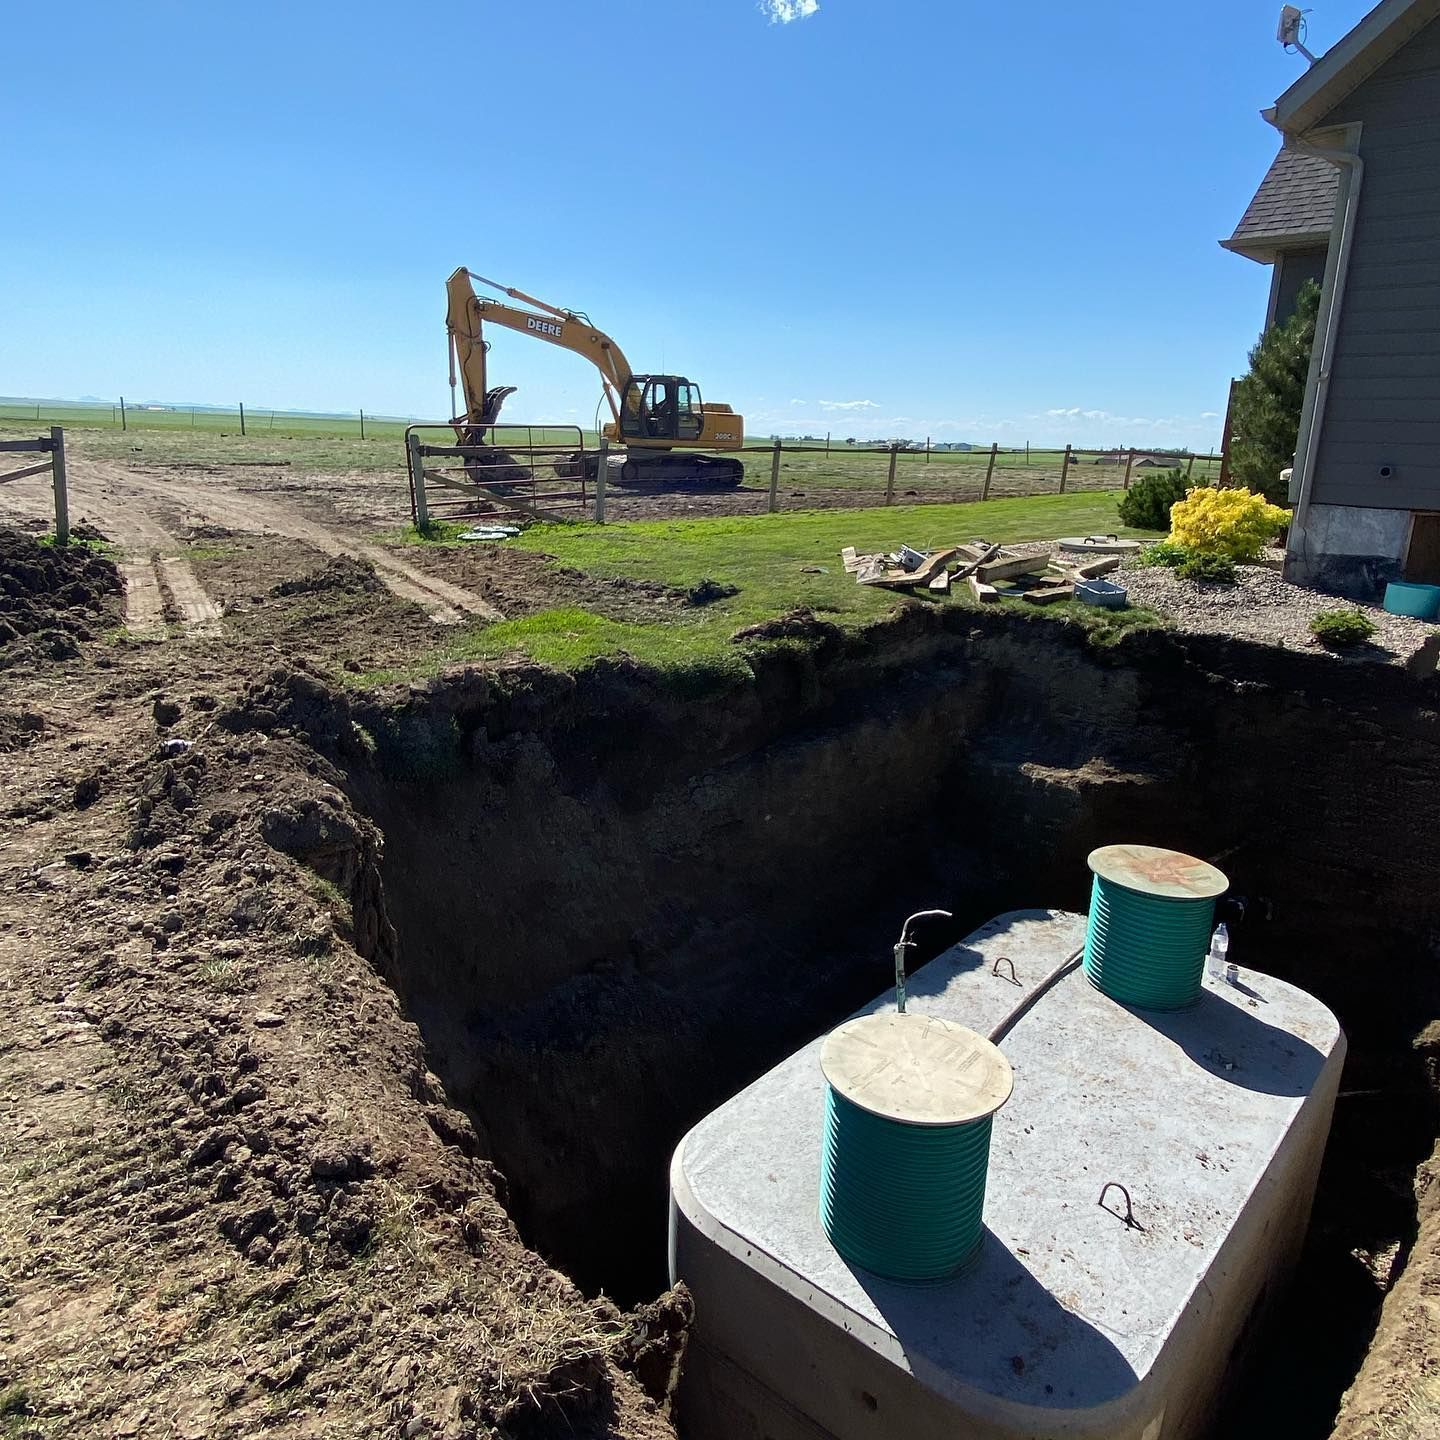 A septic tank is being installed in the dirt in front of a house